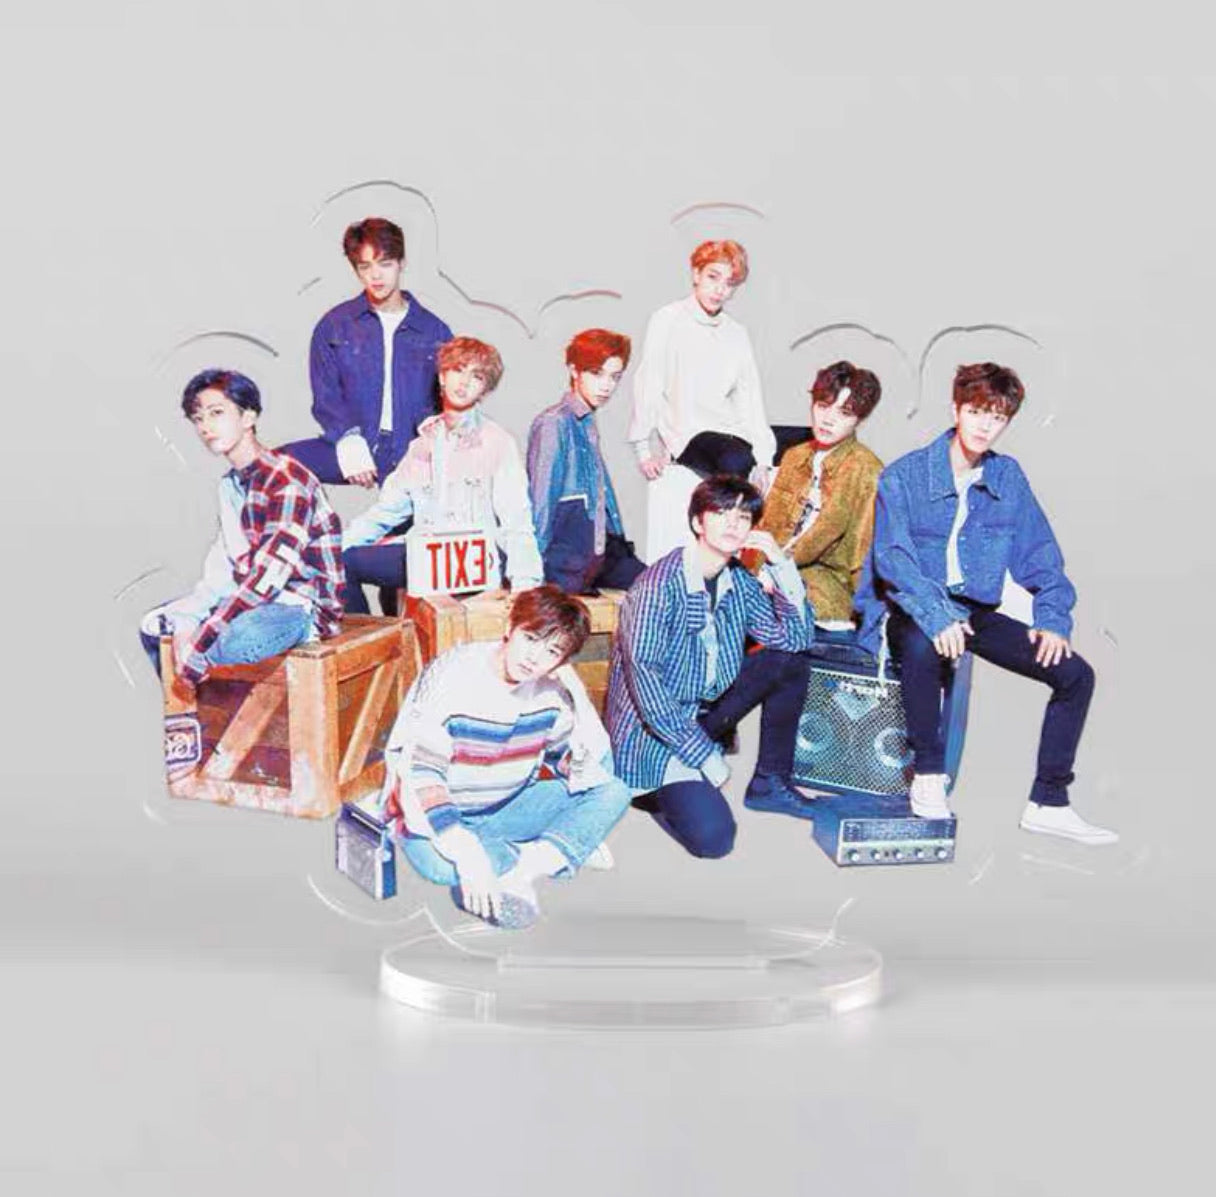 Acrylic Photo Standee at 15cm Size